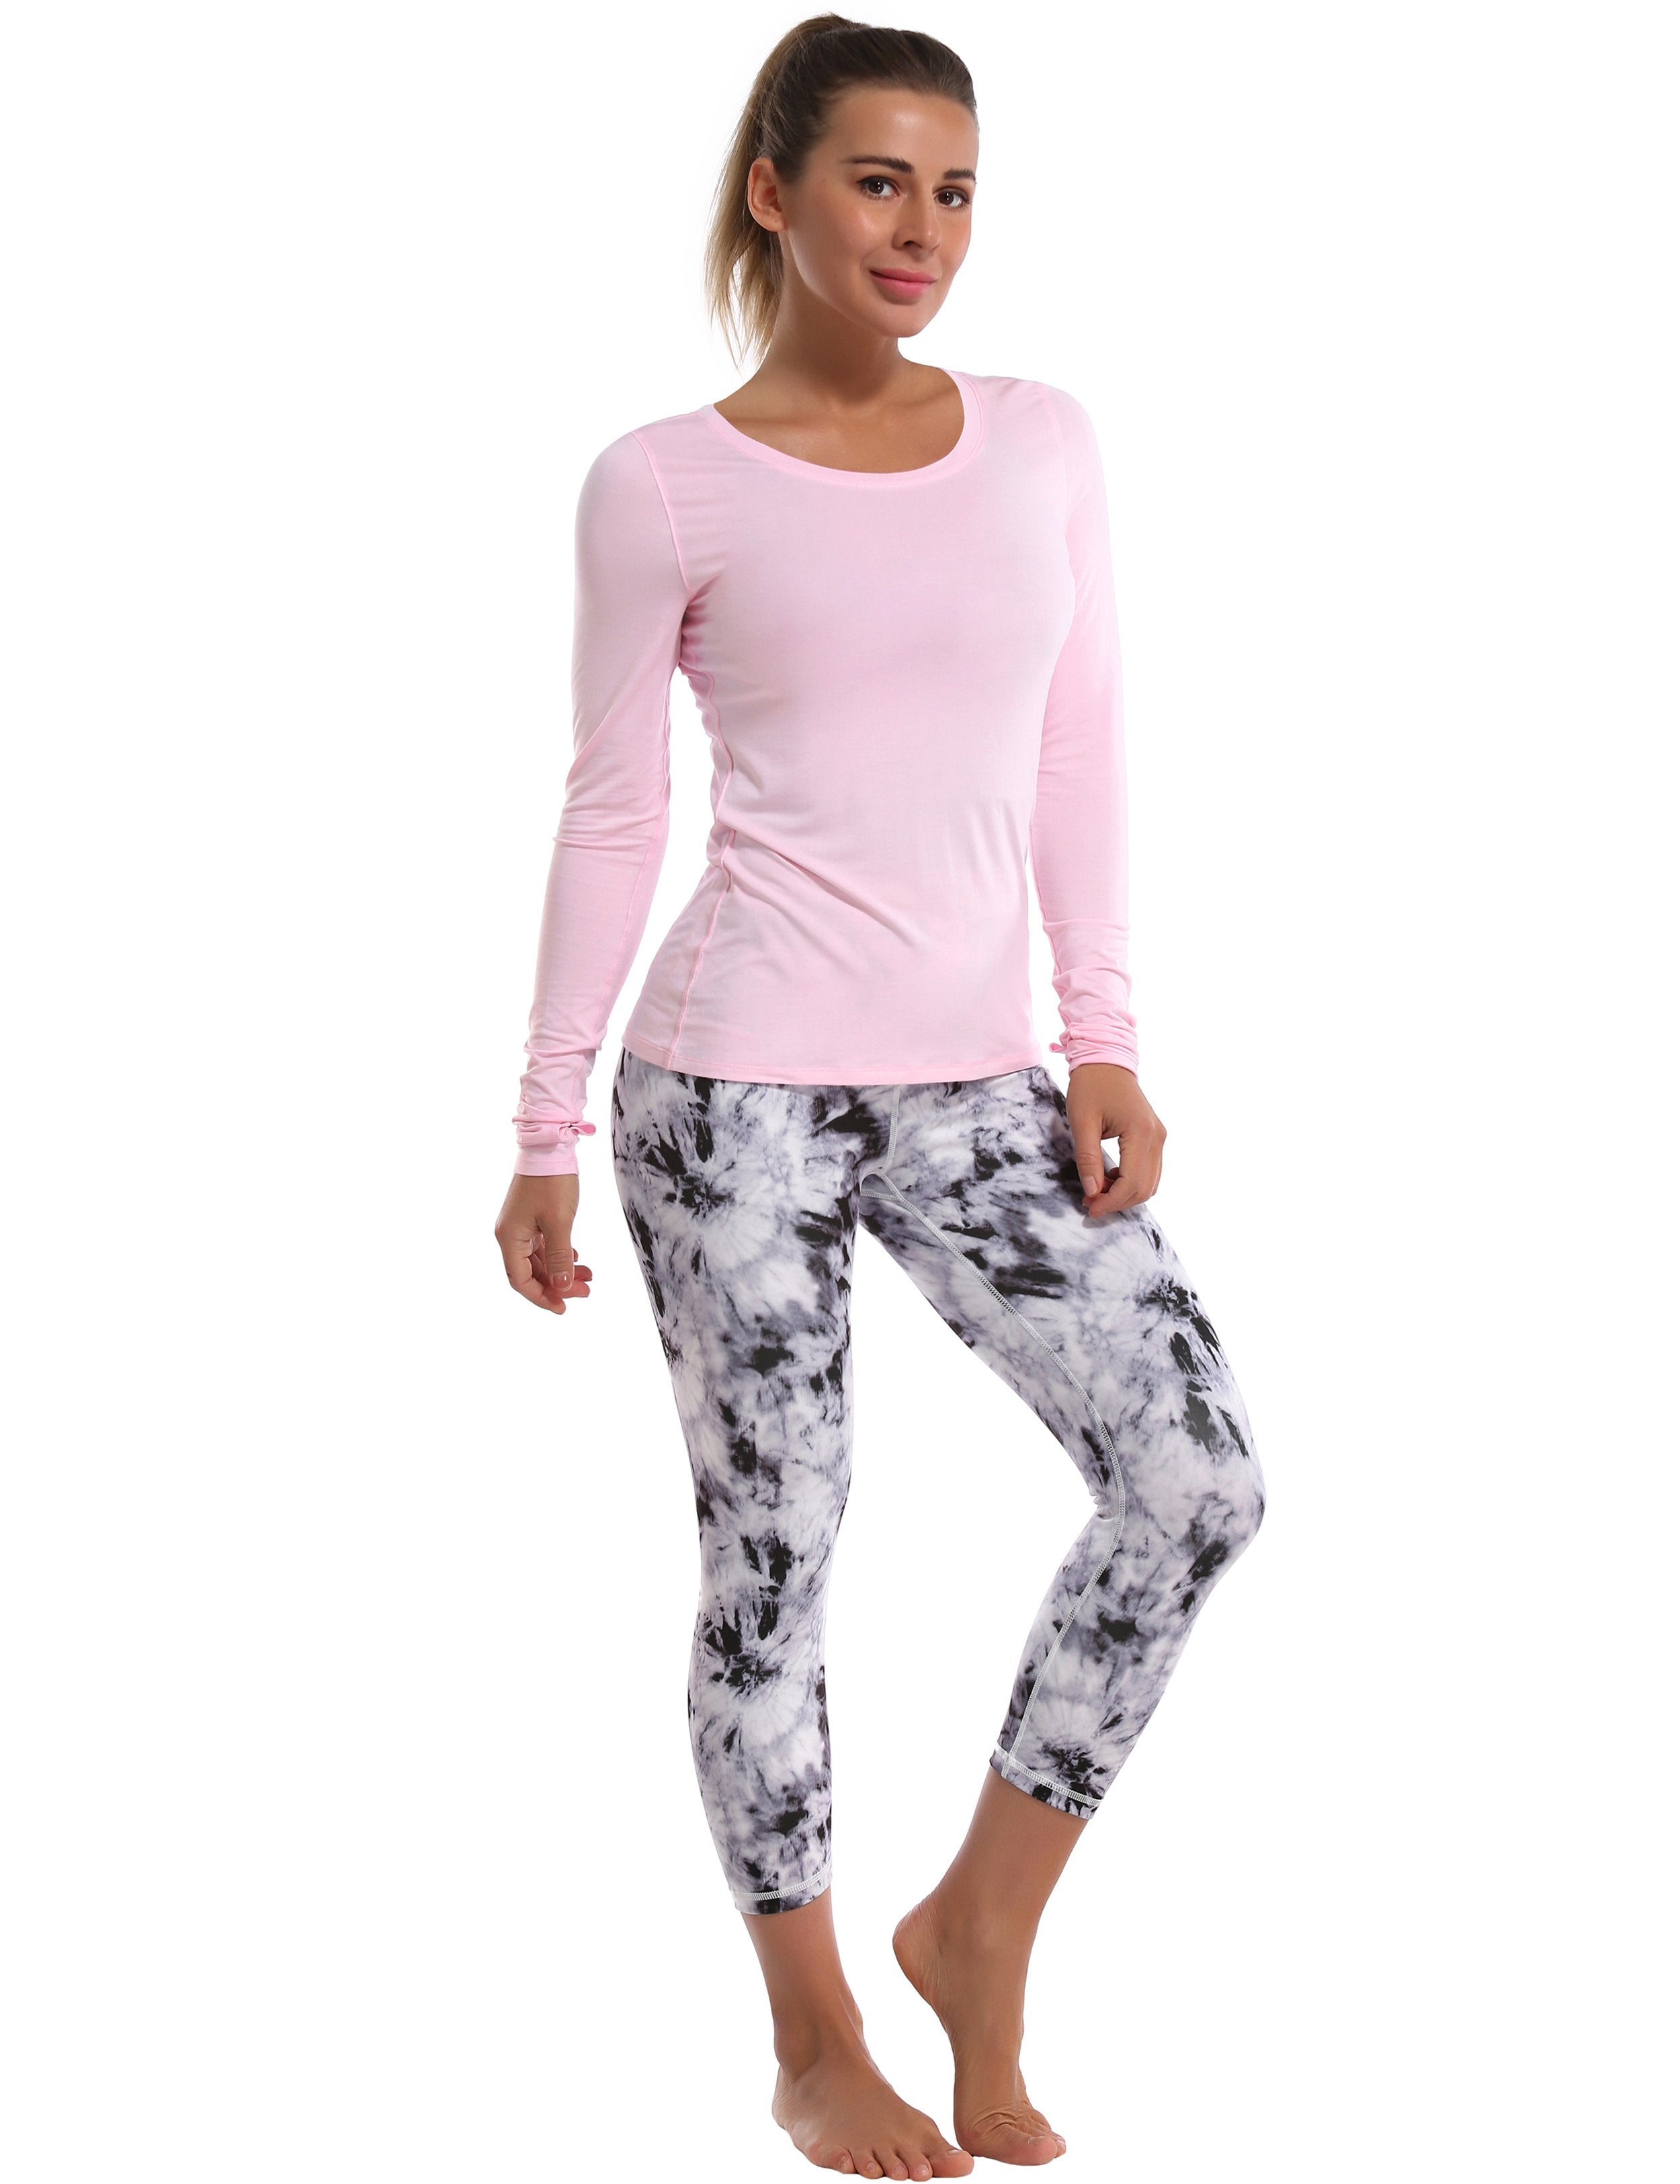 Athlete Long Sleeve Tops lightpink Designed for On the Move Slim fit 93%Modal/7%Spandex Four-way stretch Naturally breathable Super-Soft, Modal Fabric